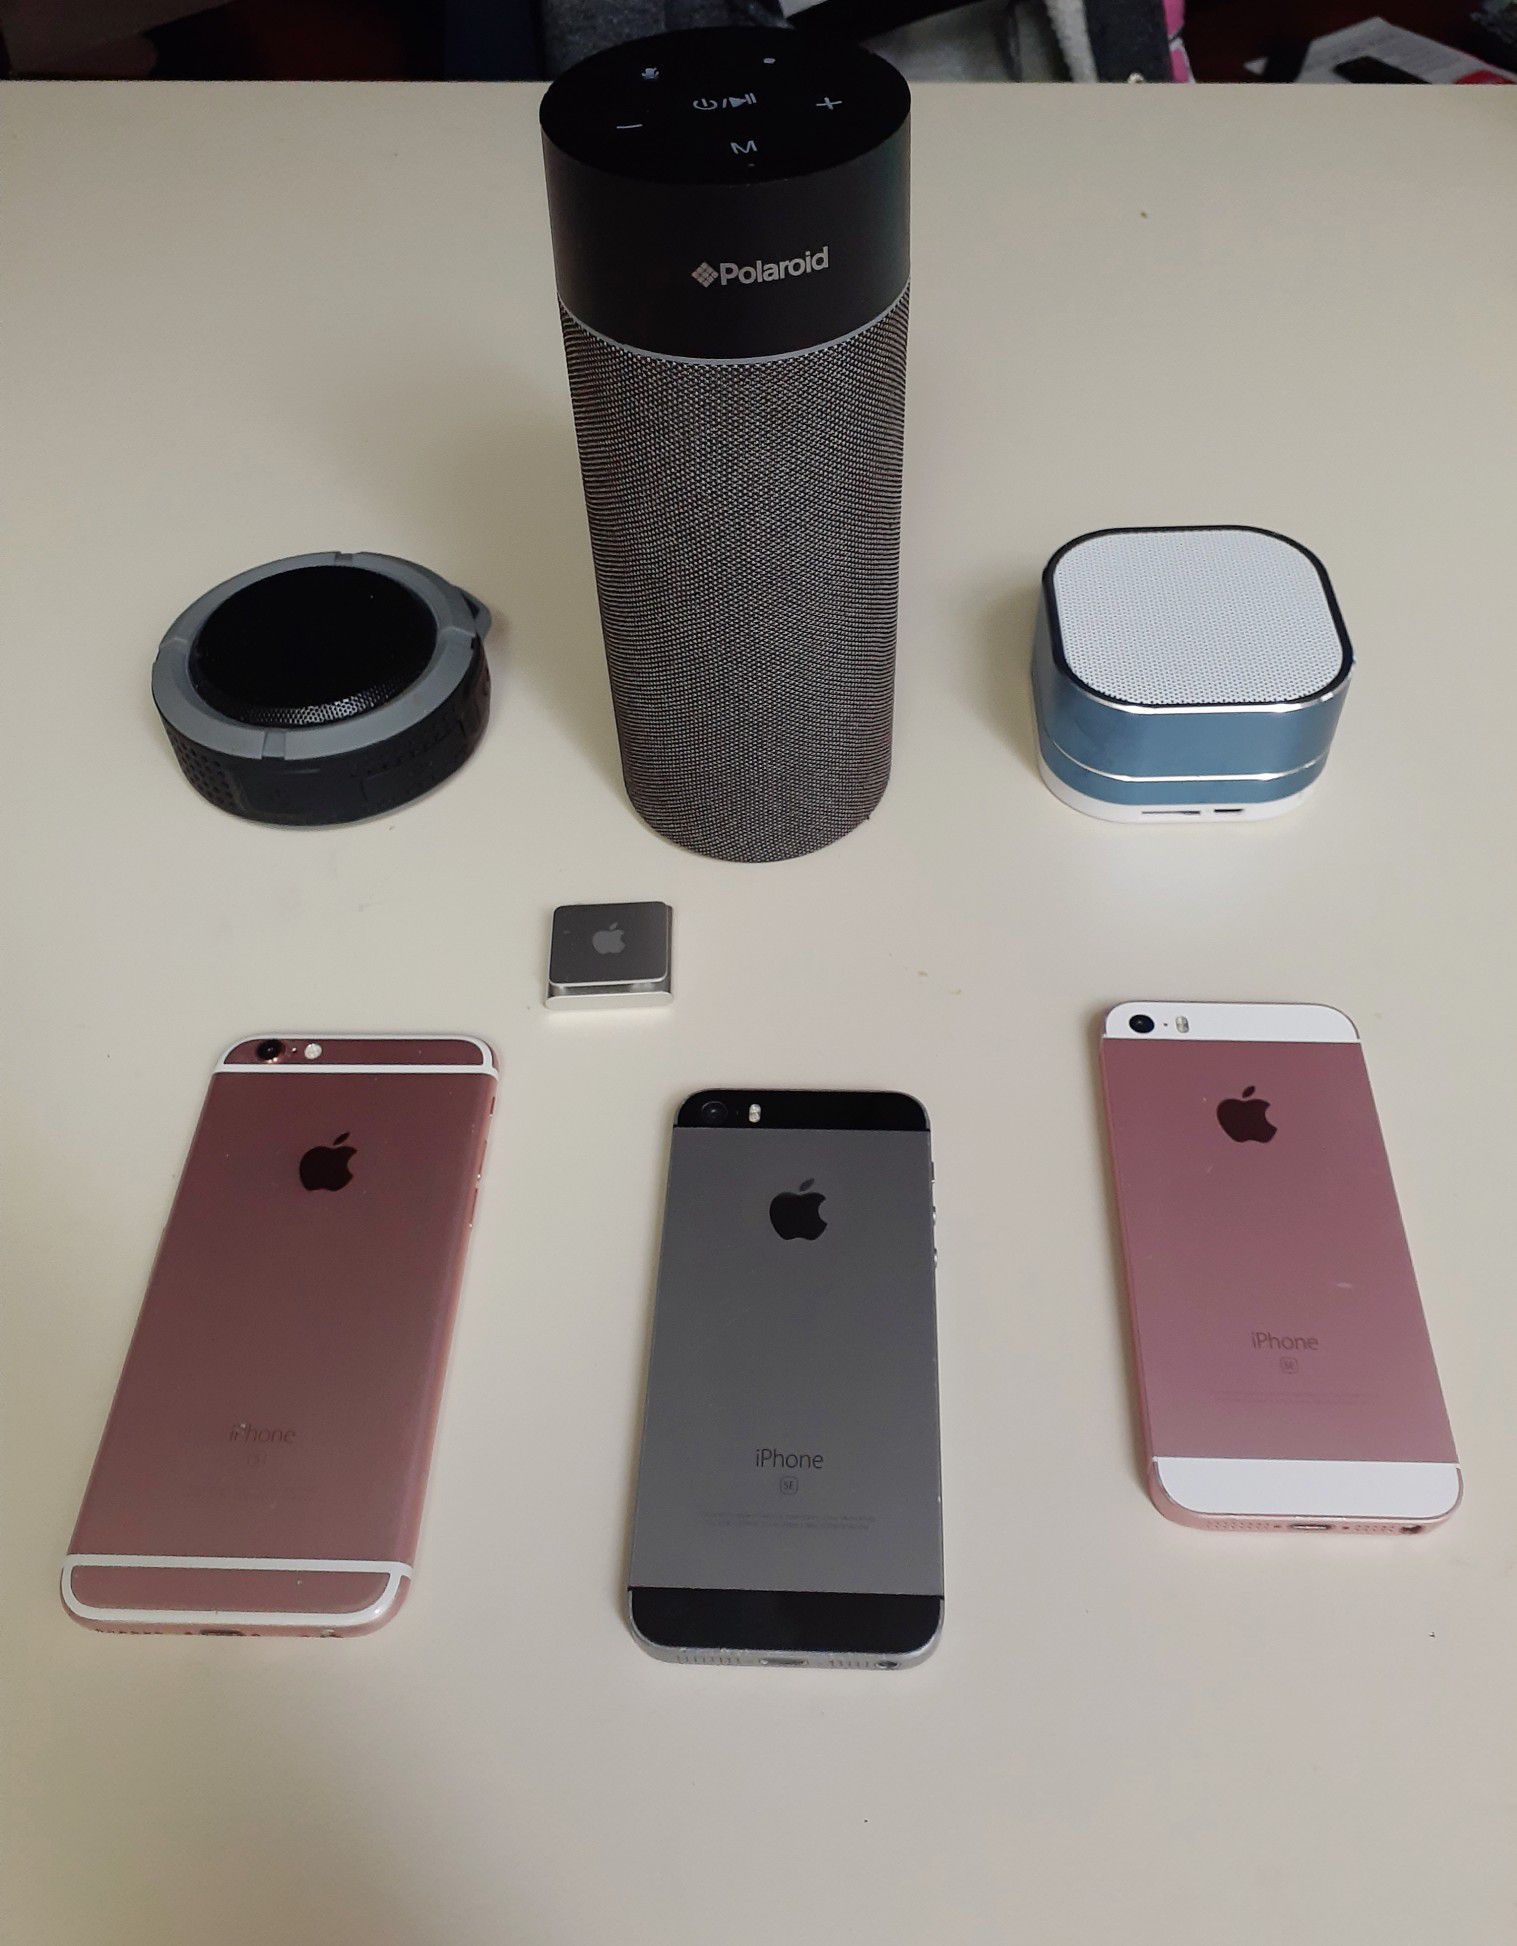 iPhones and Bluetooths